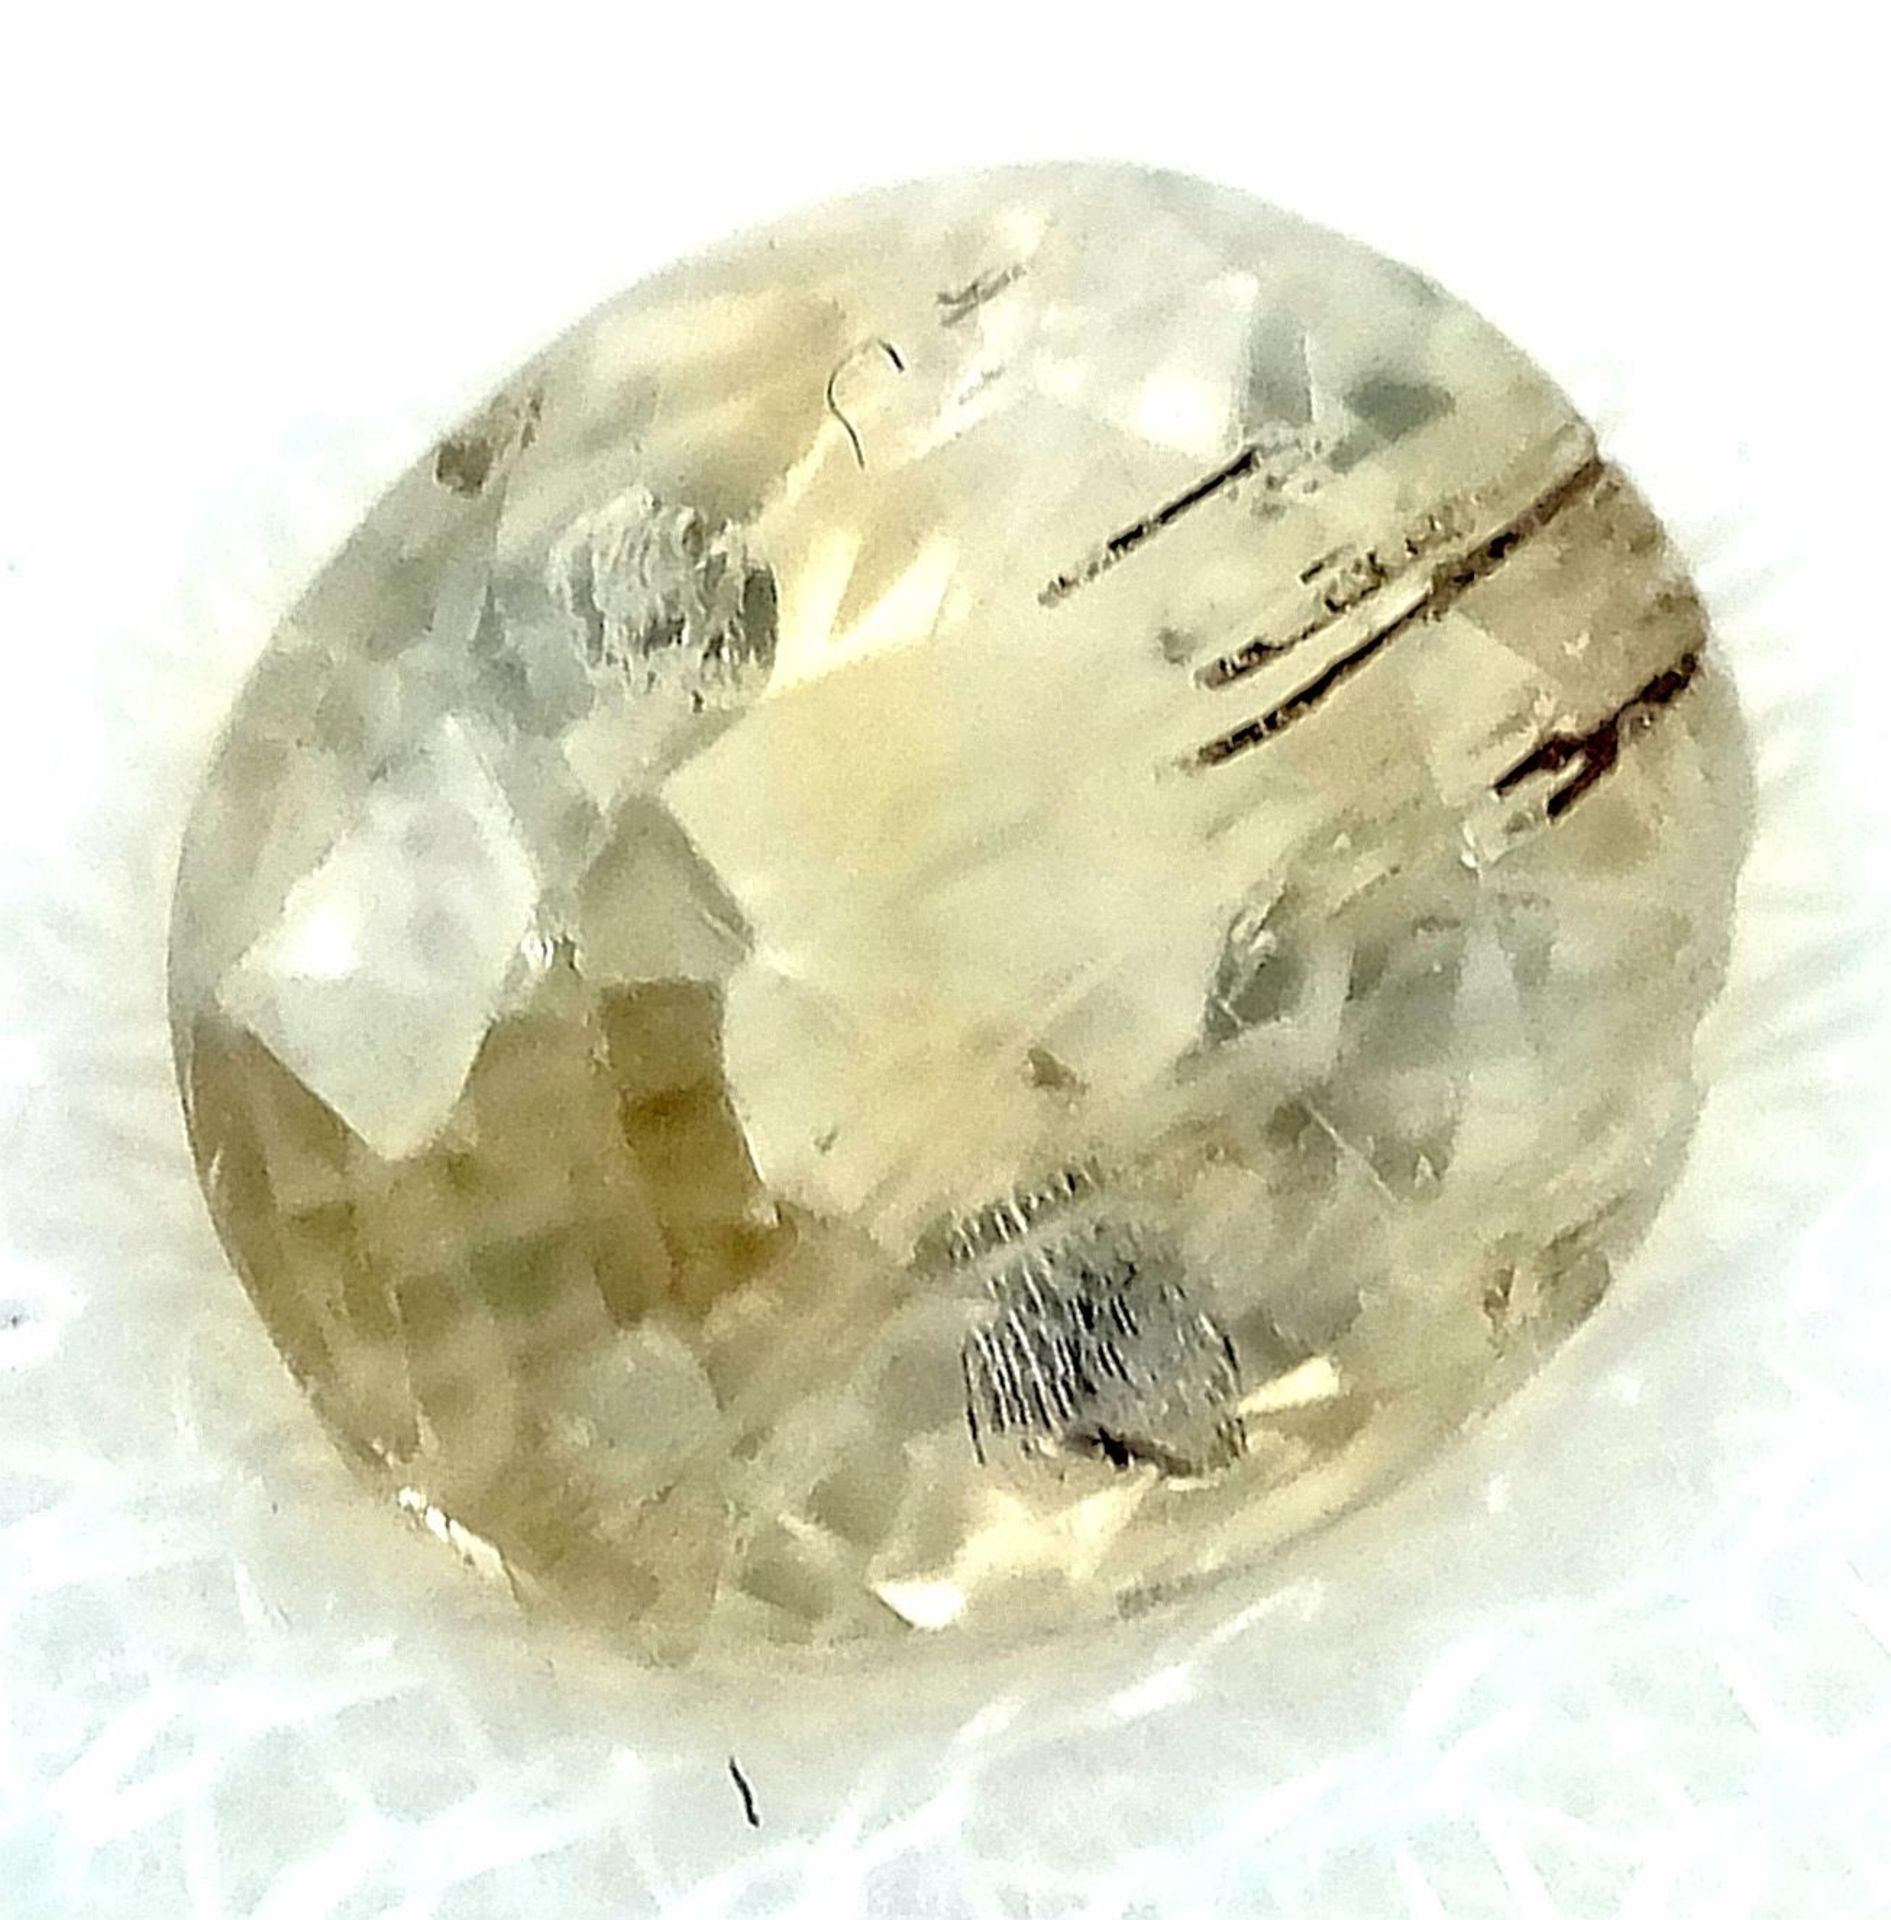 A 2.34ct Untreated Yellow Madagascar Sapphire - Sealed Container - AIG Certified.